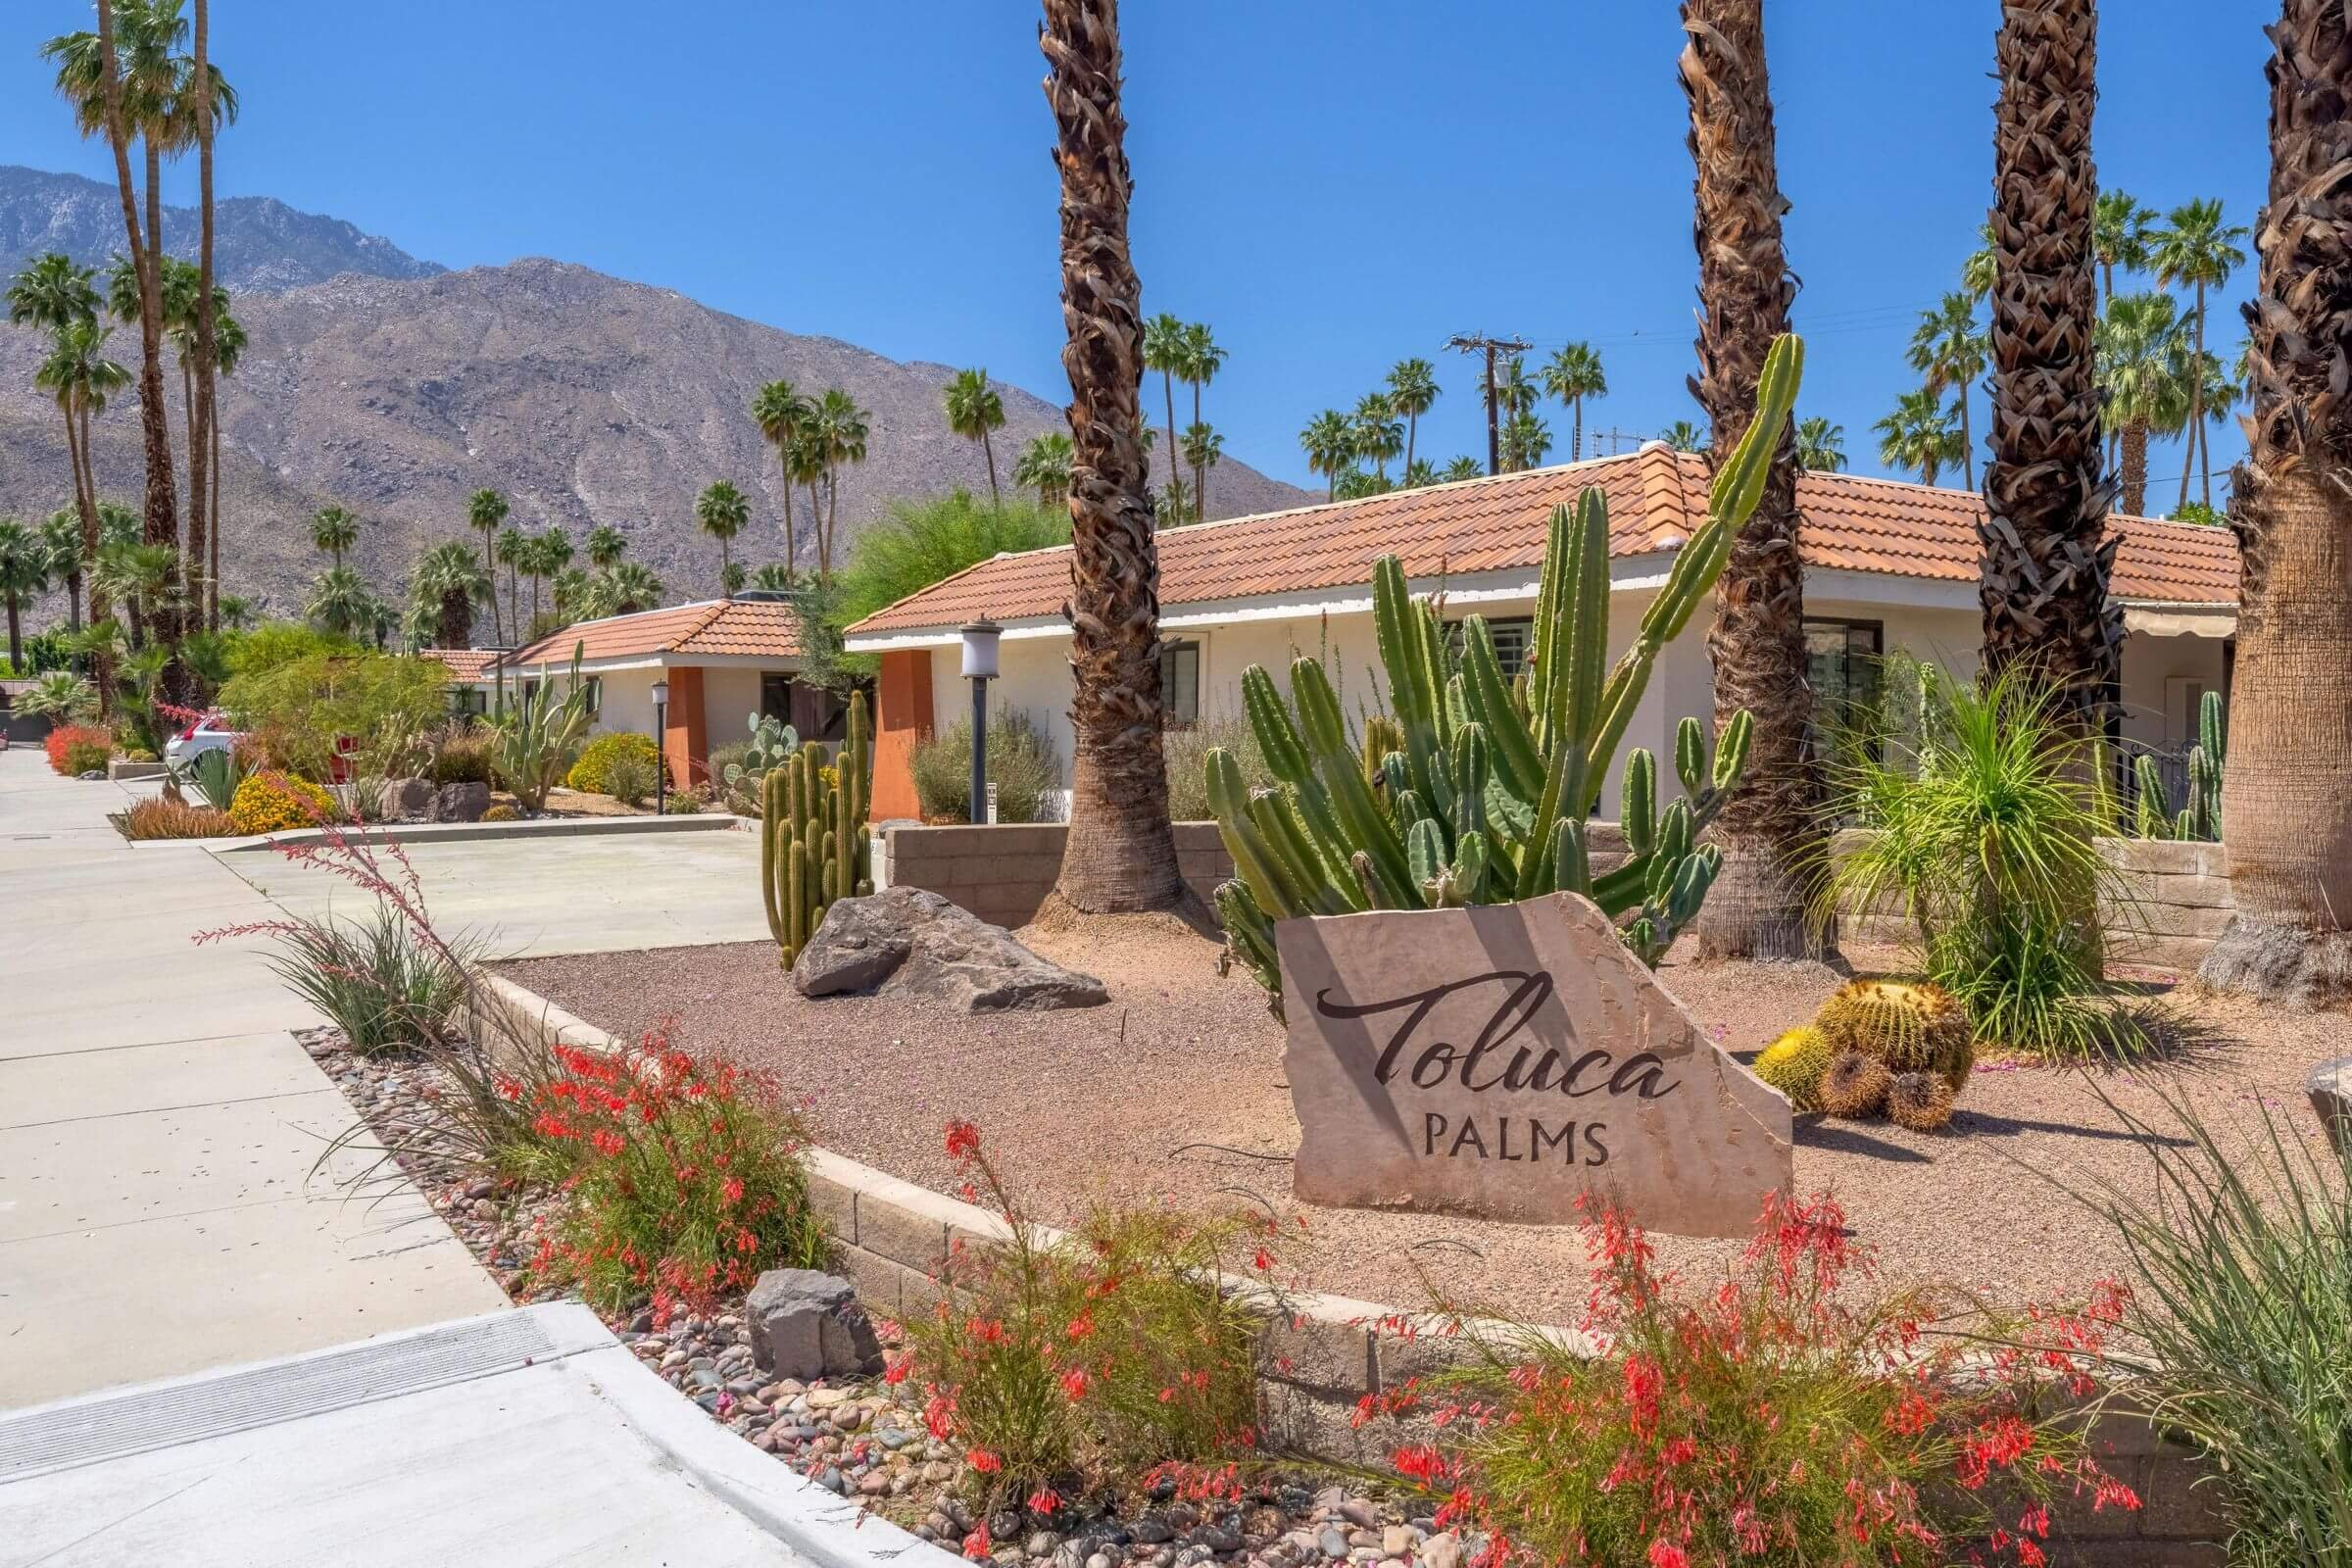 Toluca Palms Homes For Sale